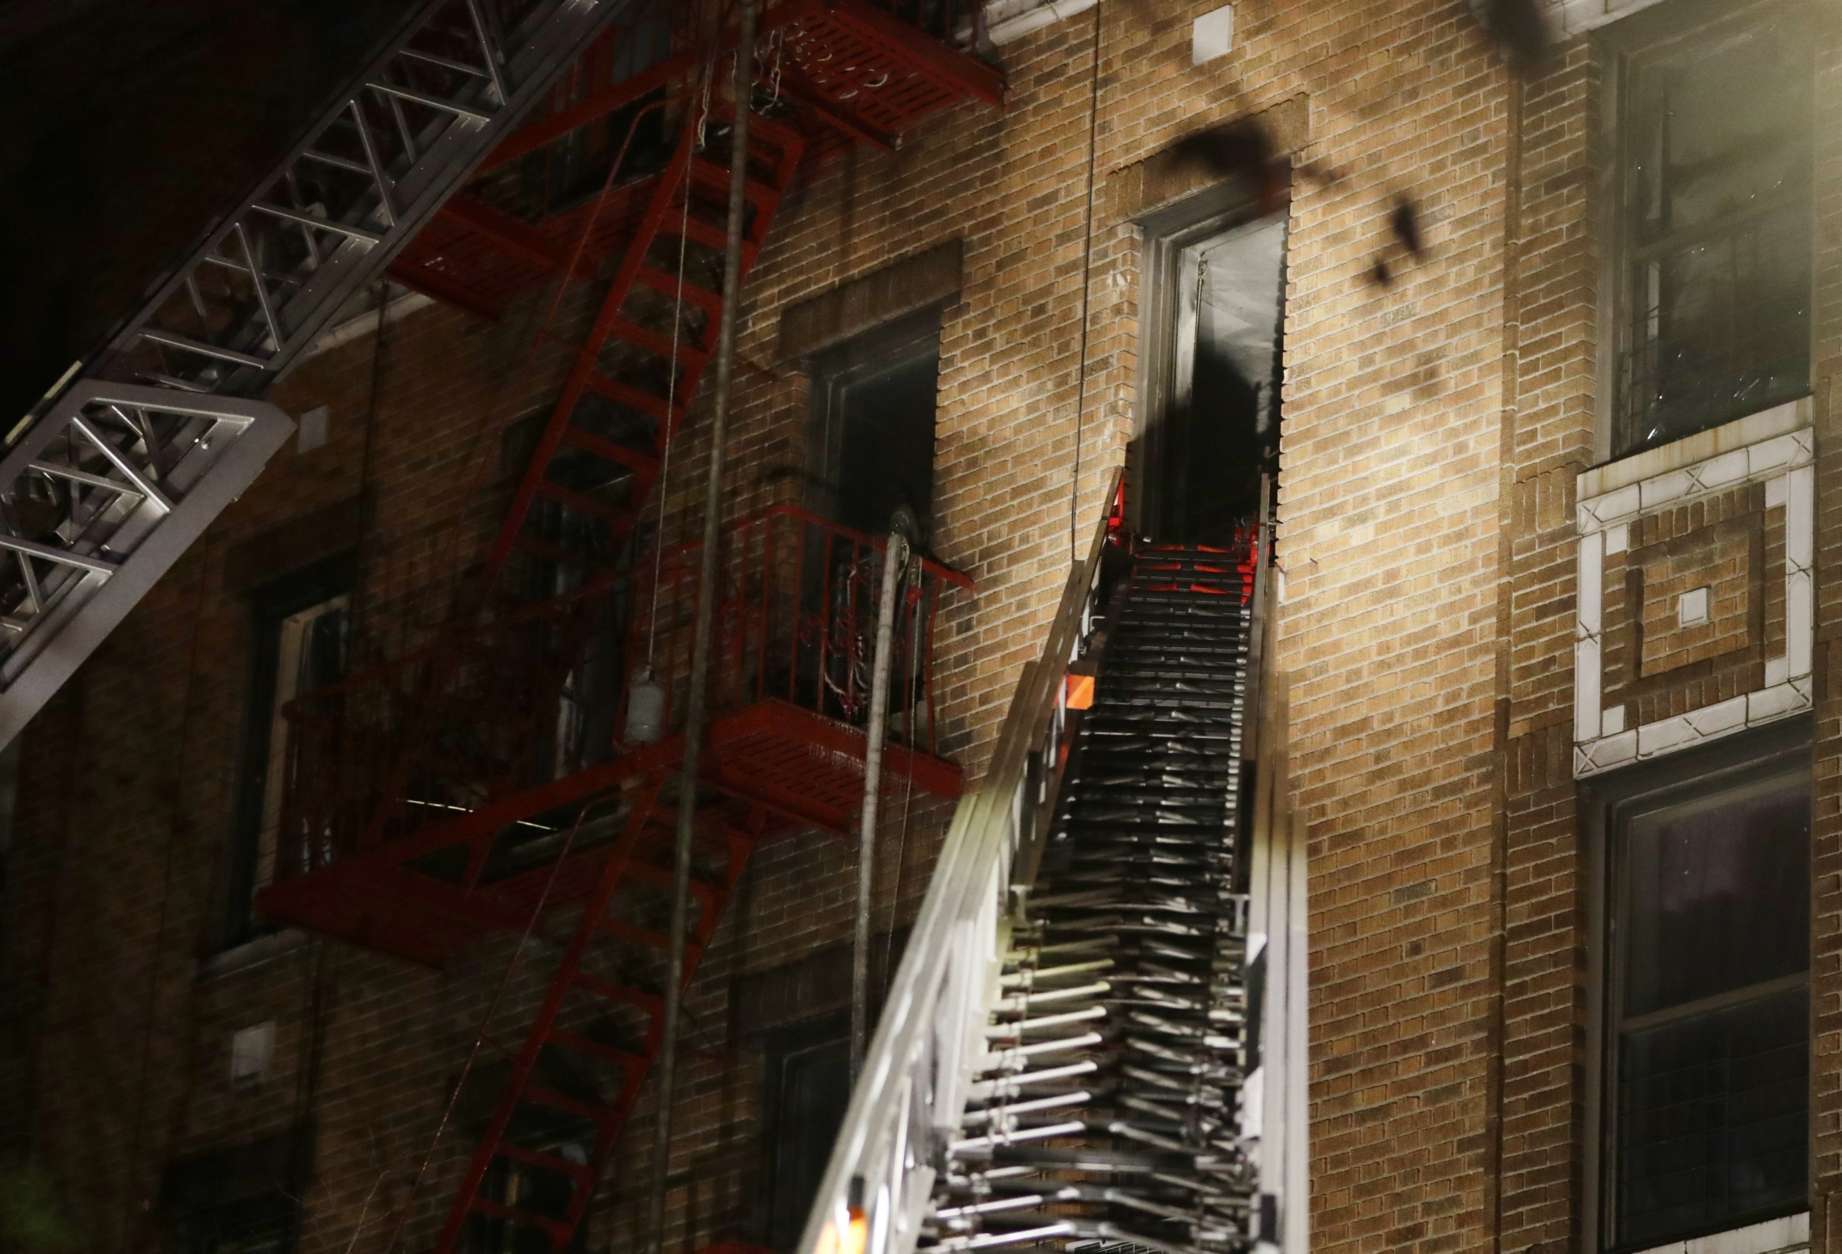 Firefighters respond to a deadly fire Thursday, Dec. 28, 2017, in the Bronx borough of New York. The New York City mayor's press secretary says several people have died in the blaze on a frigid night, and several more have been injured.  (AP Photo/Frank Franklin II)